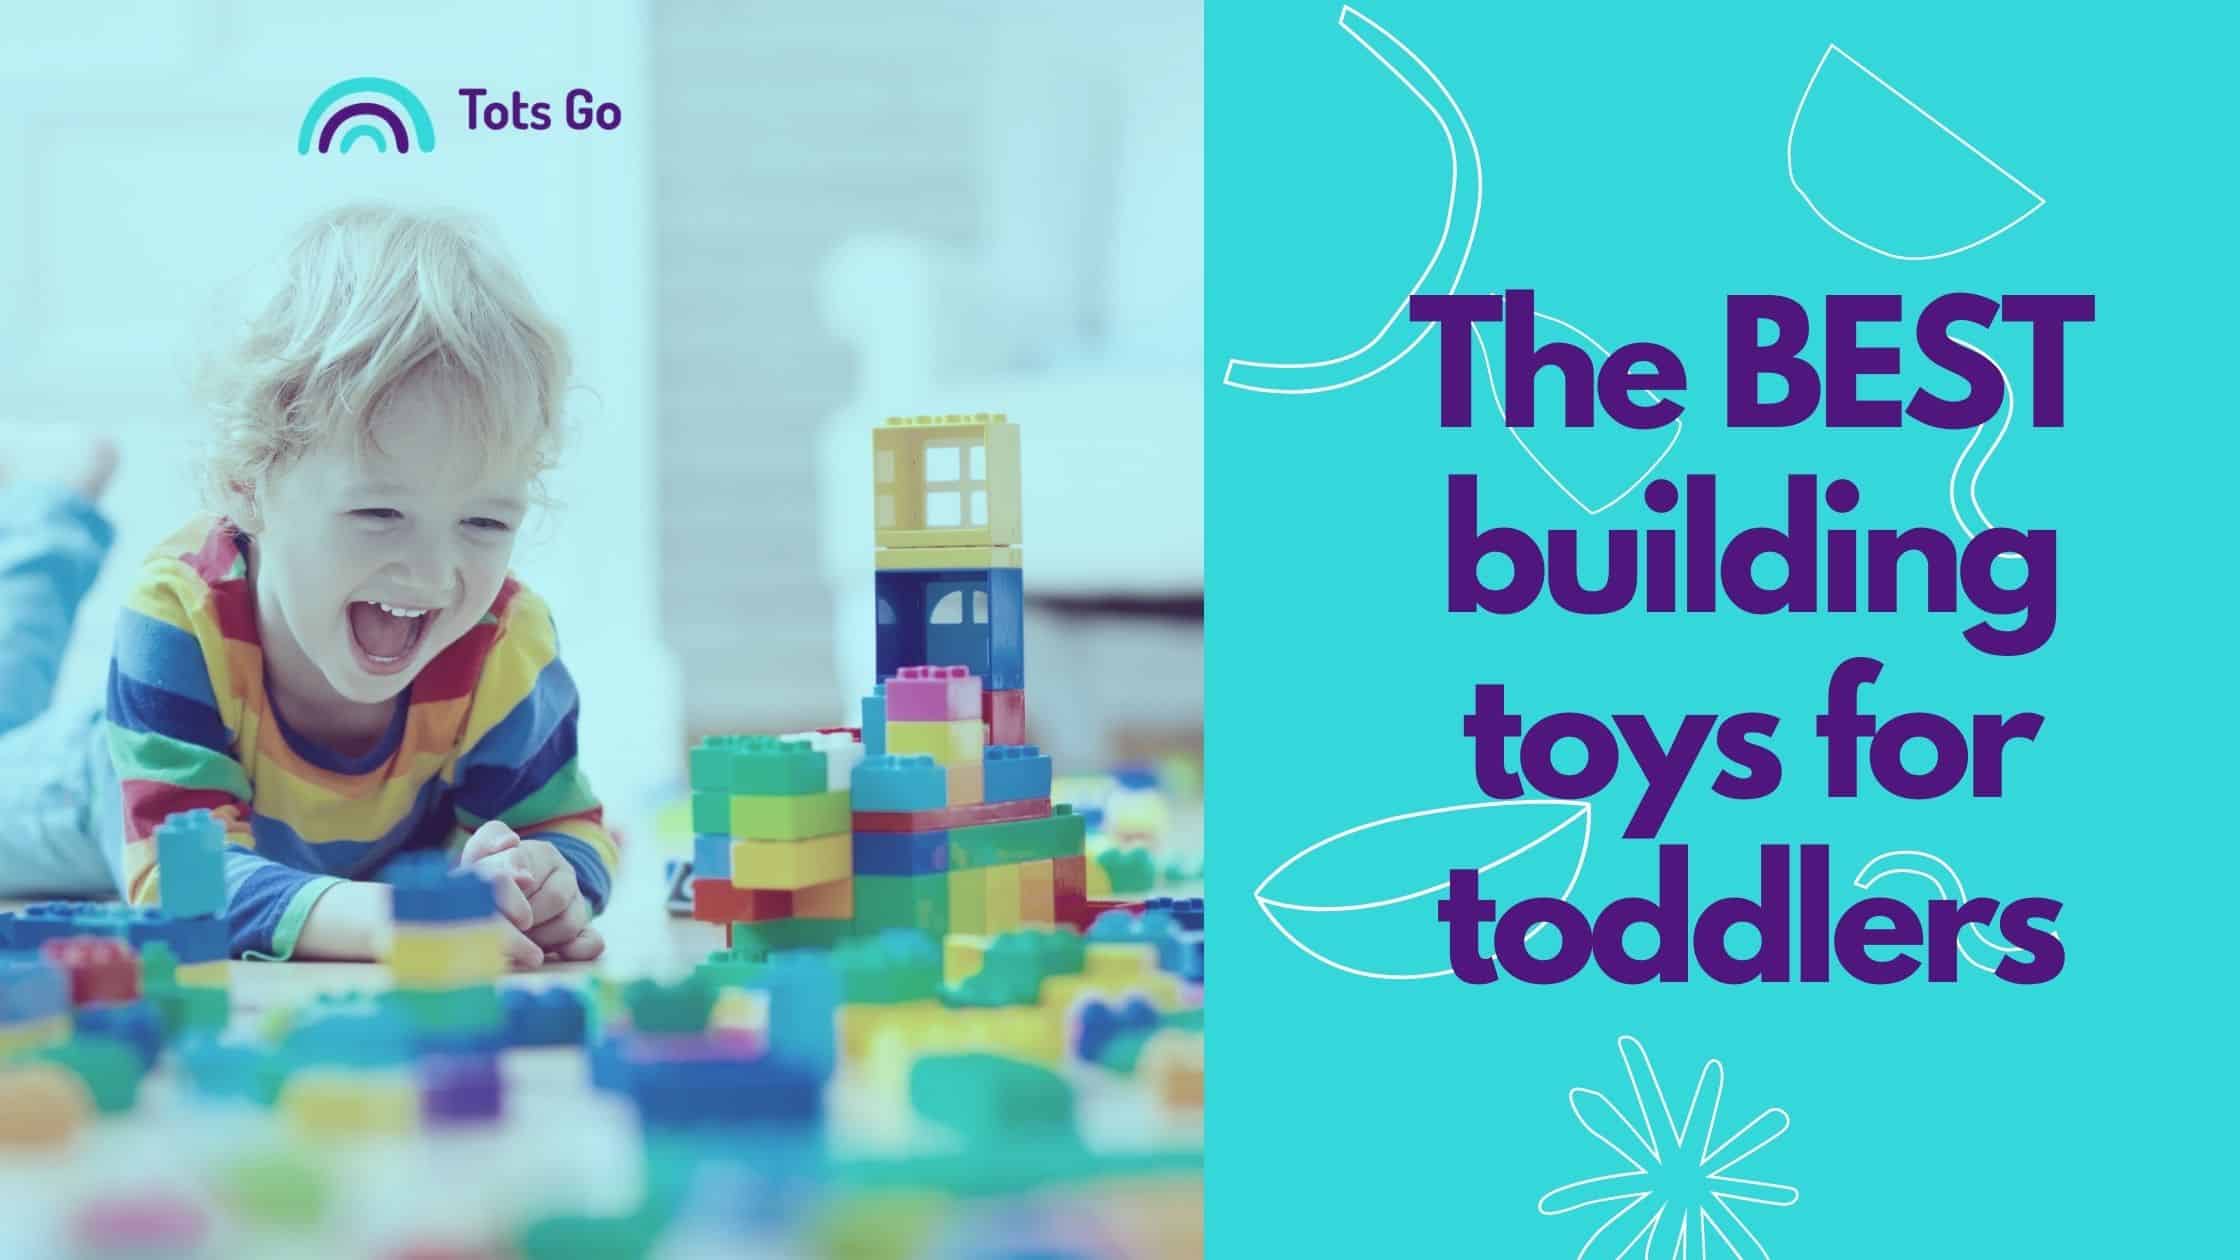 The best building toys for toddlers